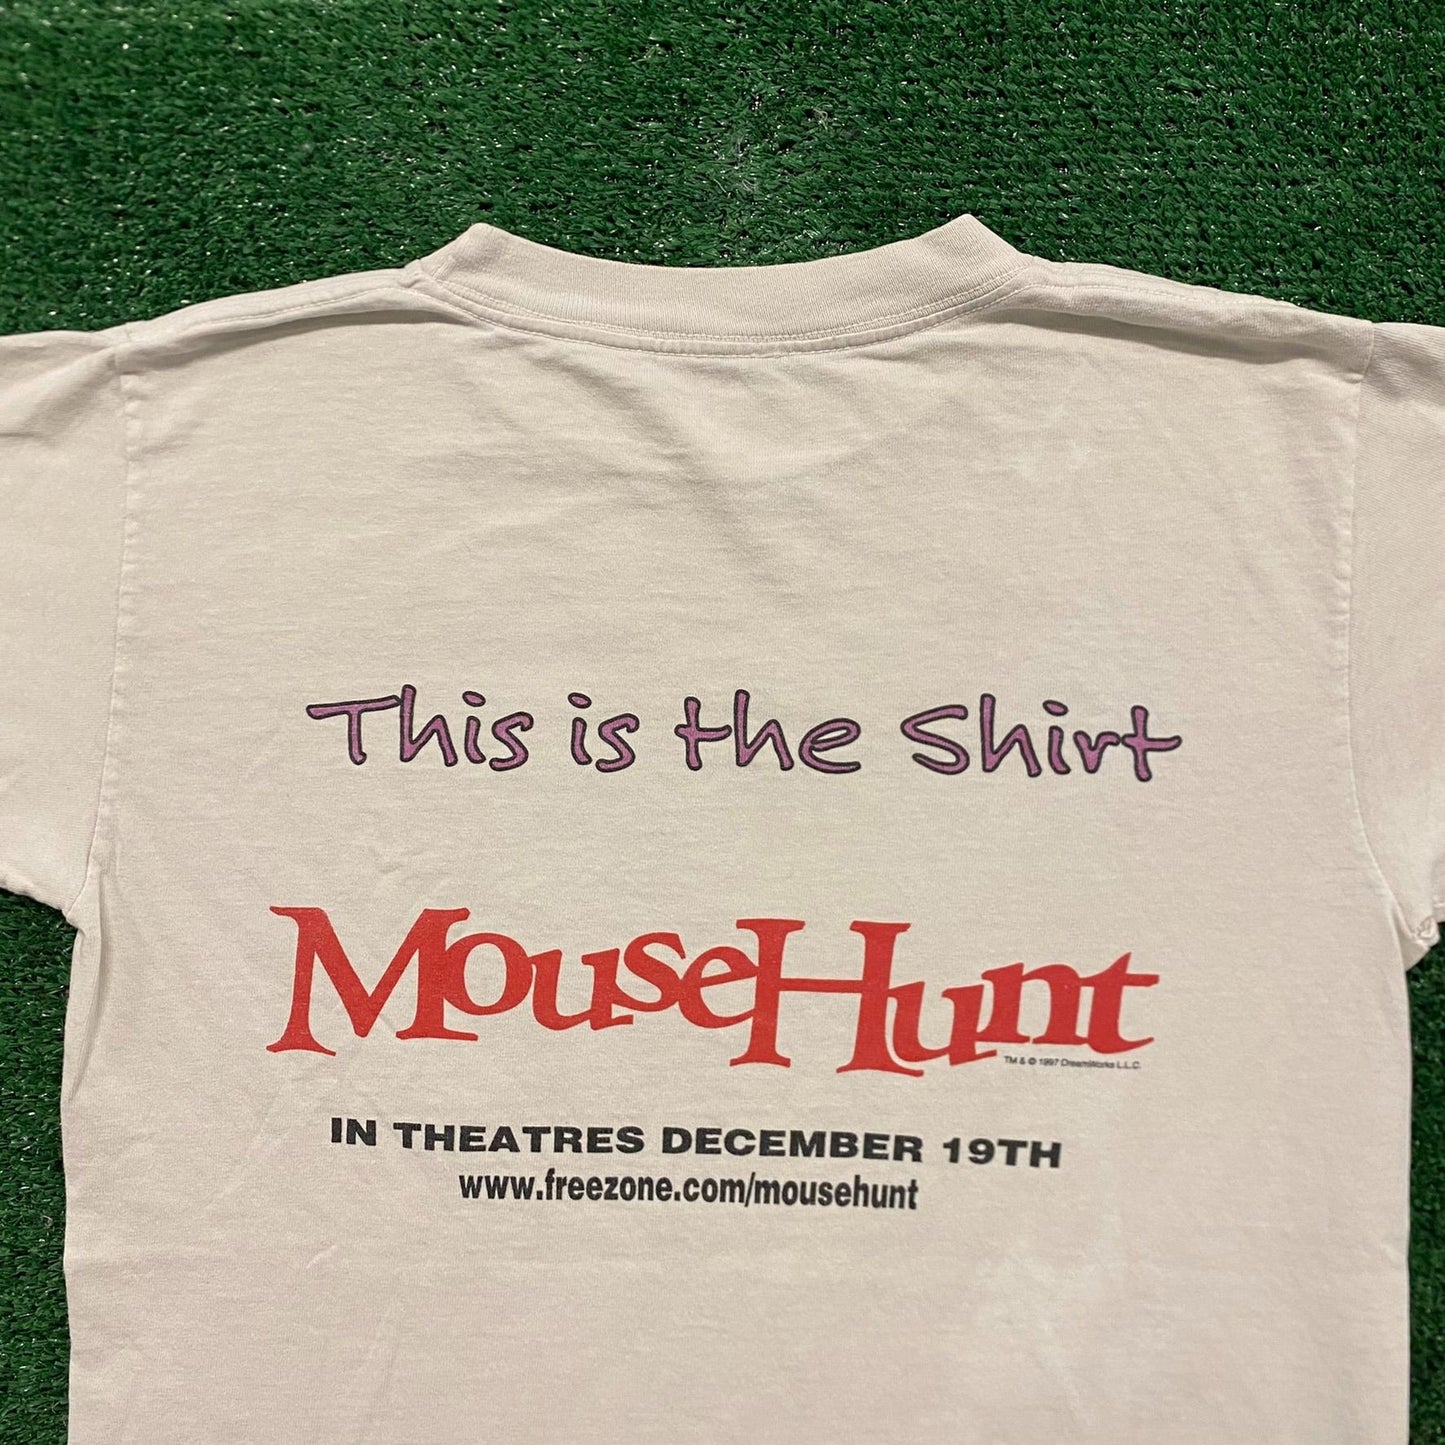 Mouse Hunt Vintage 90s Humor Comedy Movie Promo T-Shirt